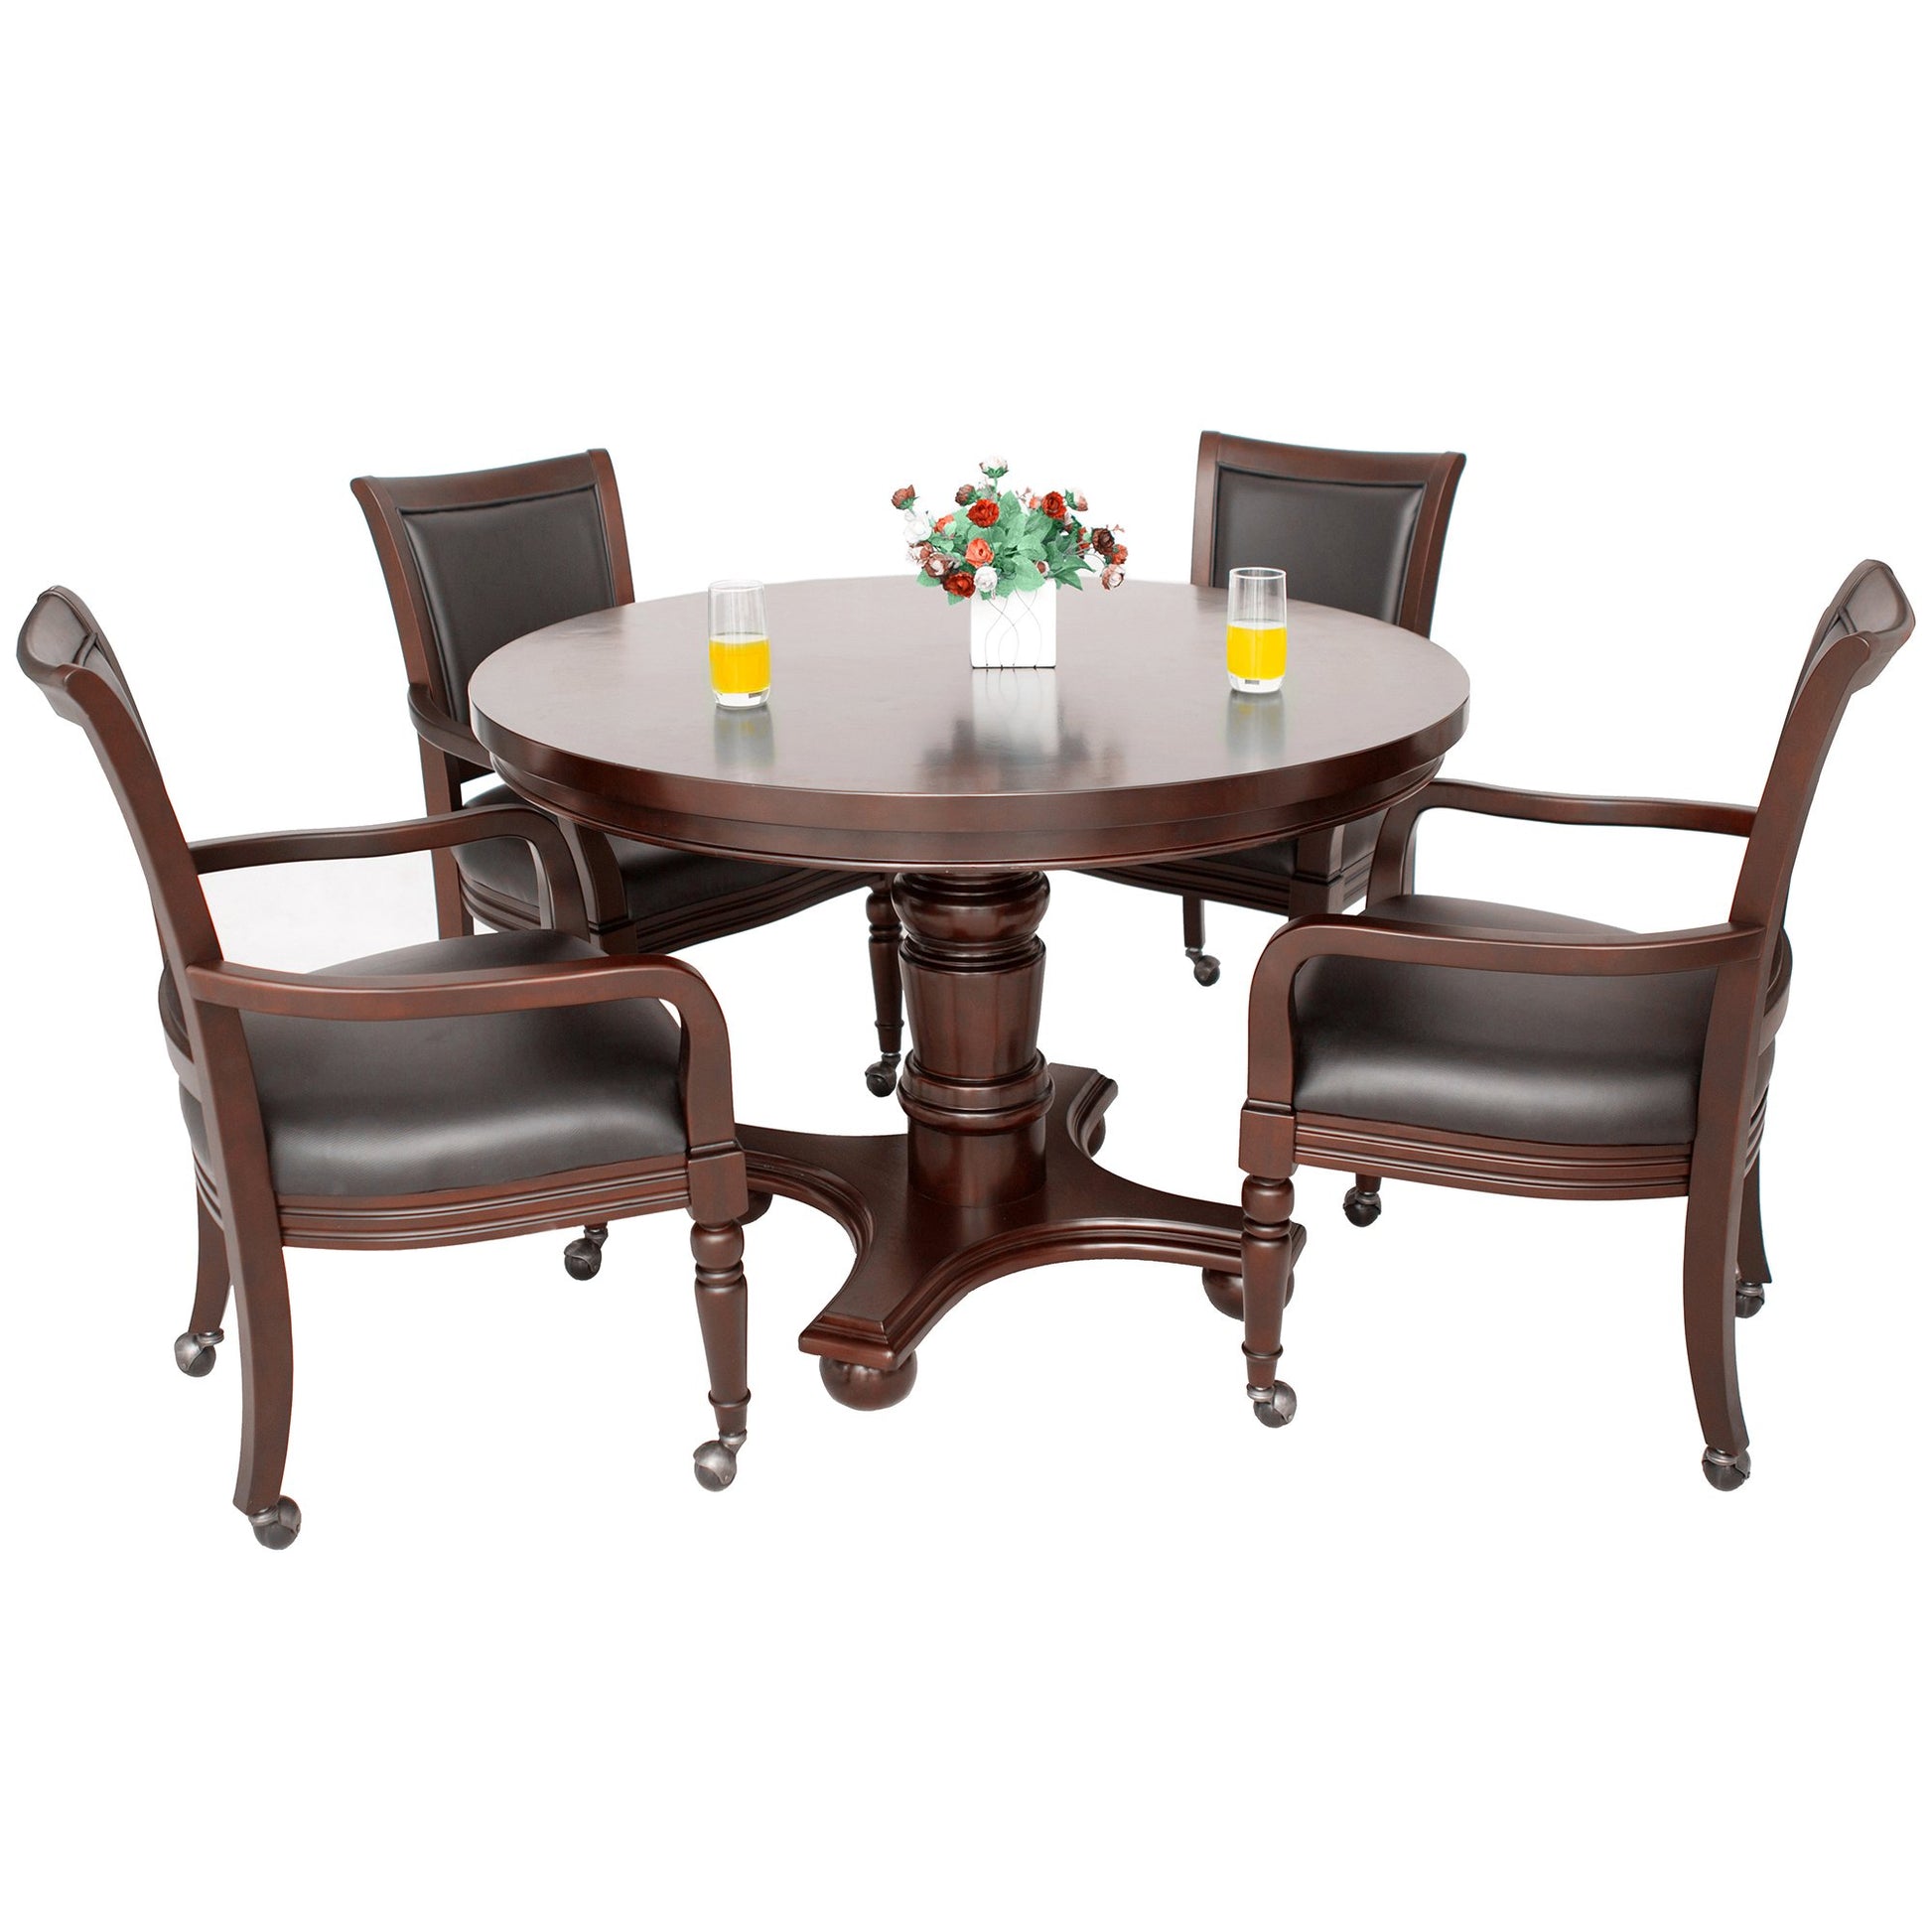 Hathaway Bridgeport Walnut Round Poker Dining Table with 4 Arm Chairs - Gaming Blaze